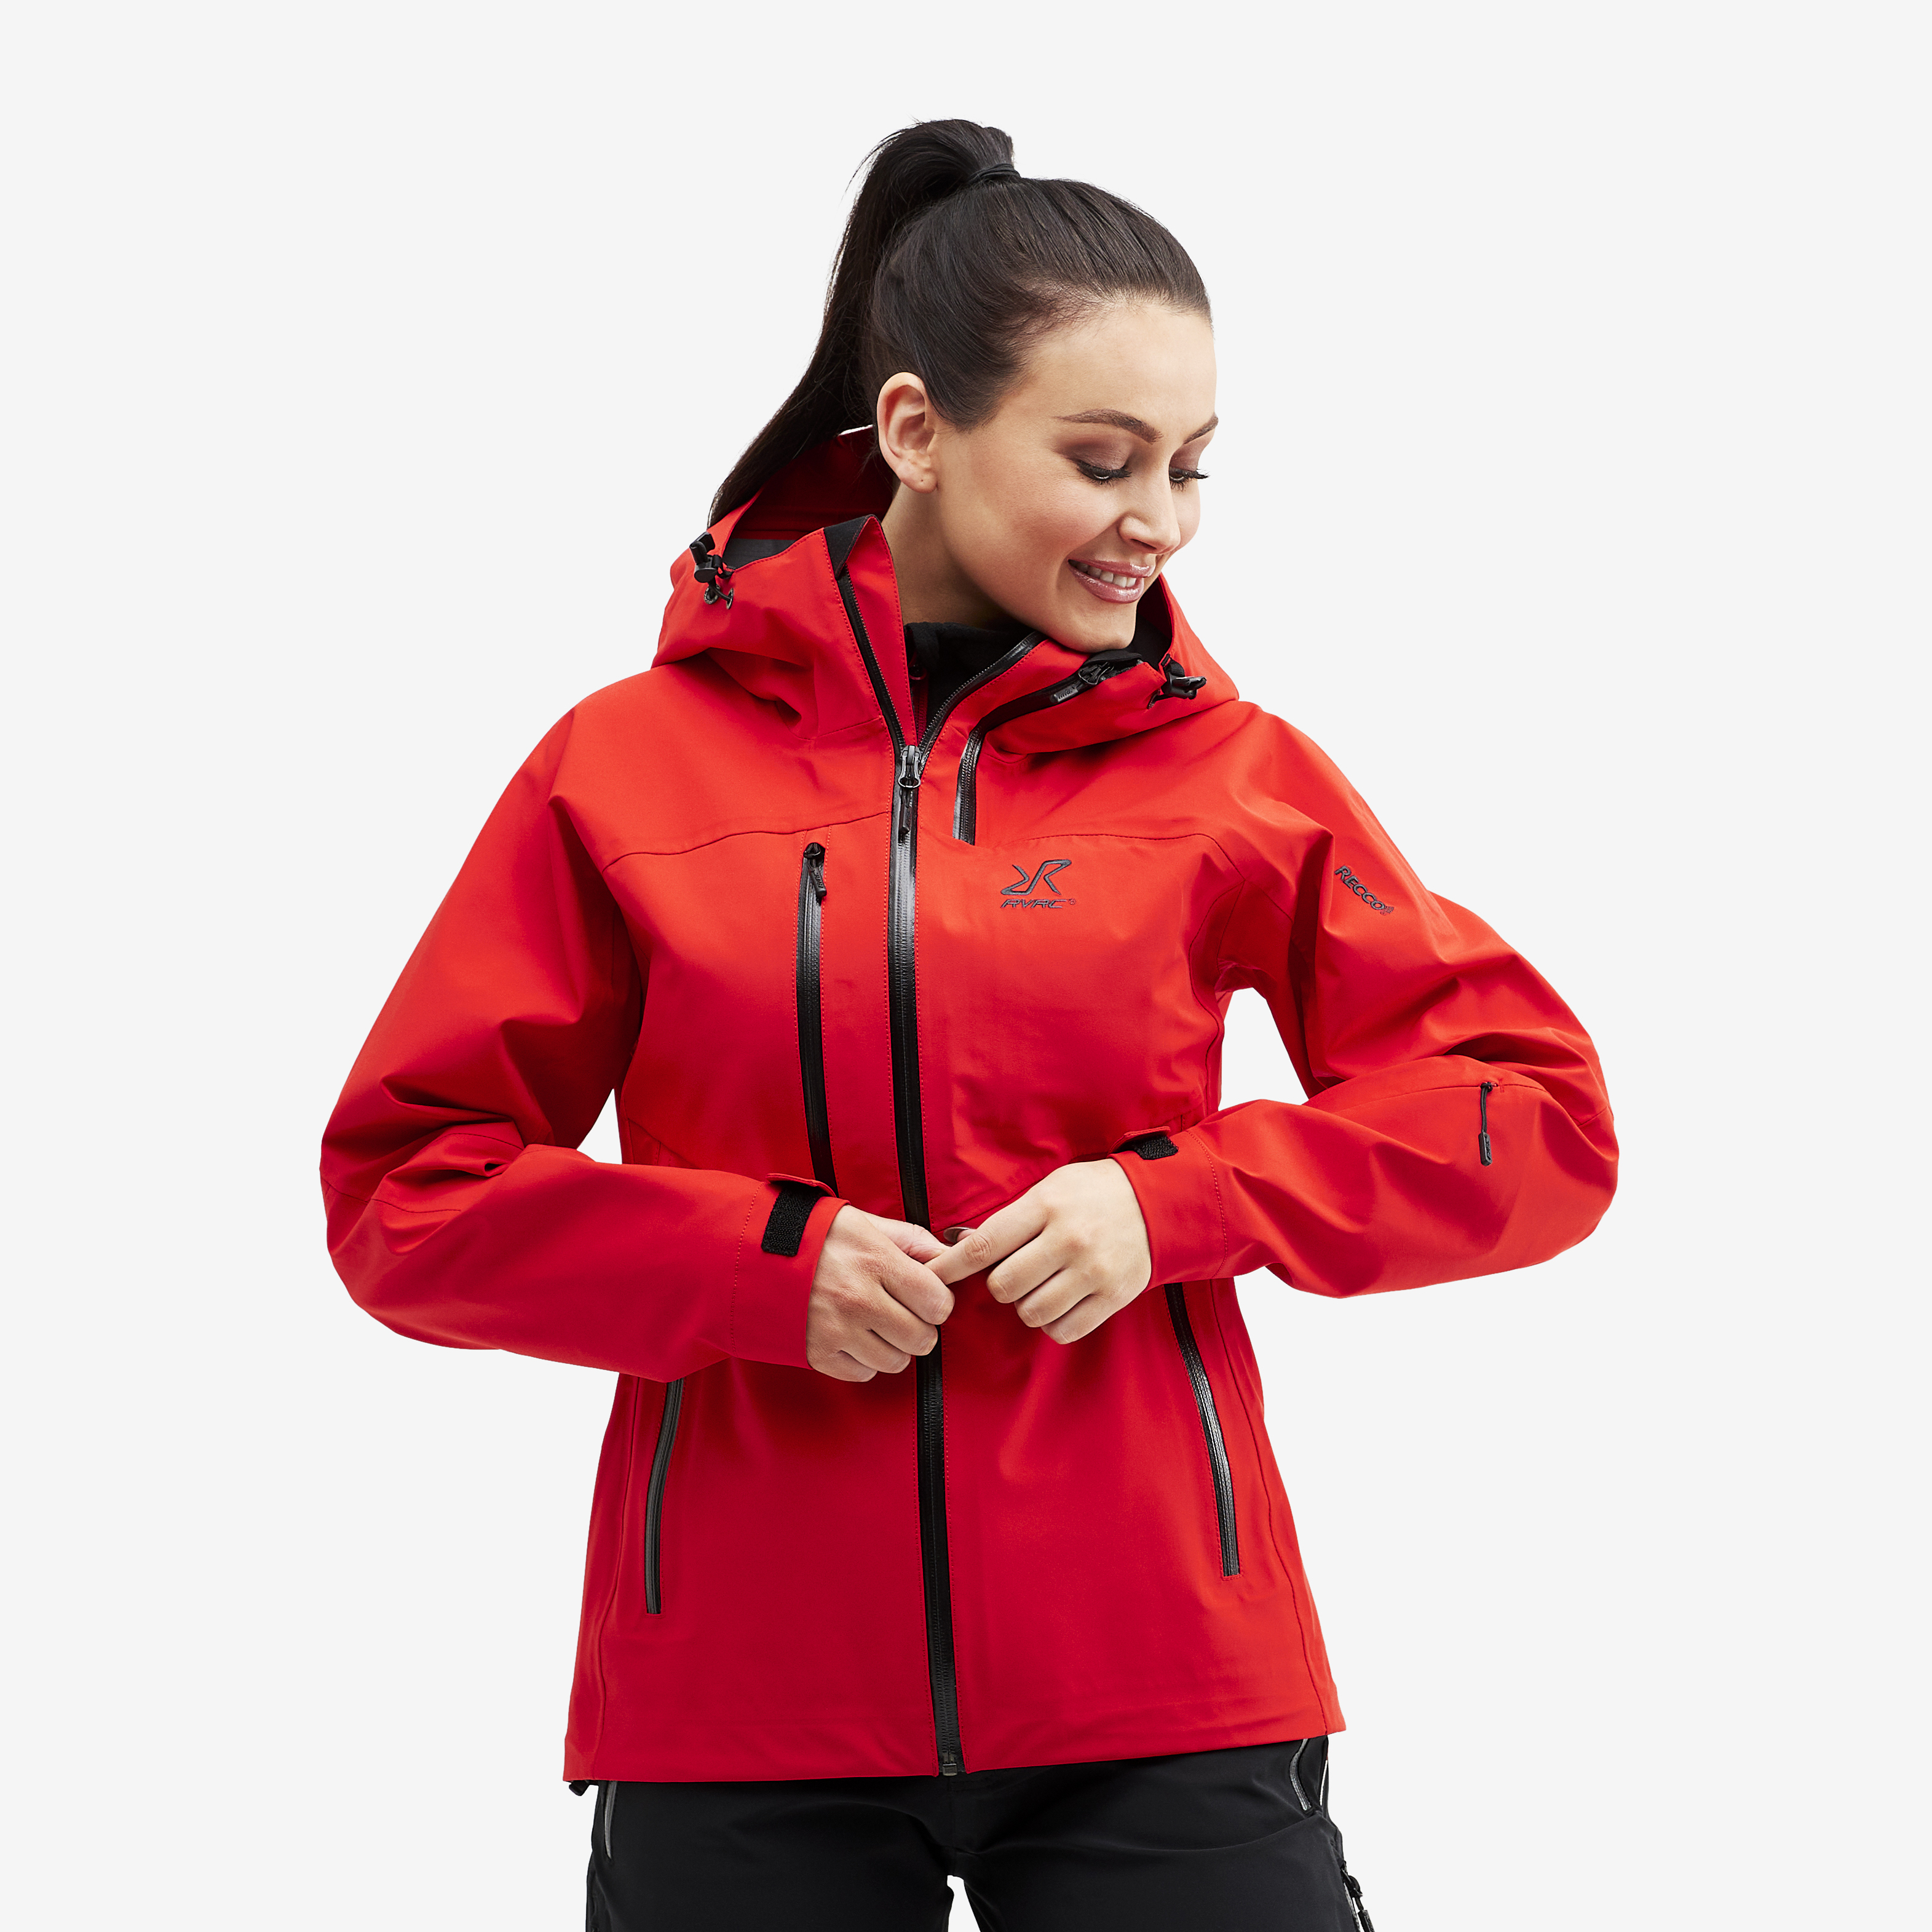 Cyclone Rescue Jacket 2.0 Flame Scarlet Mujeres